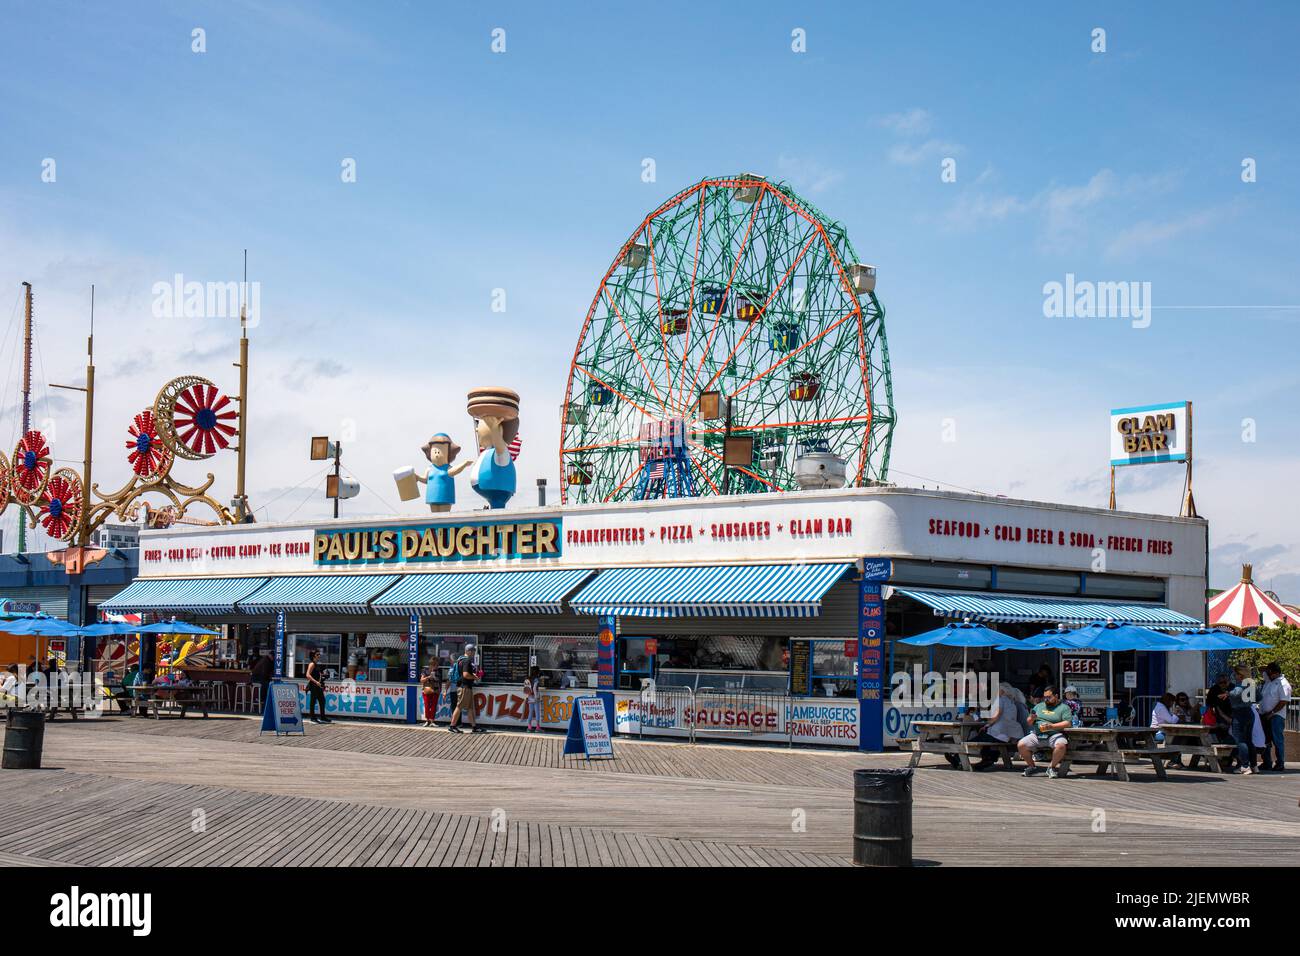 Paul's Daughter fast food restaurant in Coney Island amusement area with Wonder Wheel in the background in New York City, United States of America Stock Photo